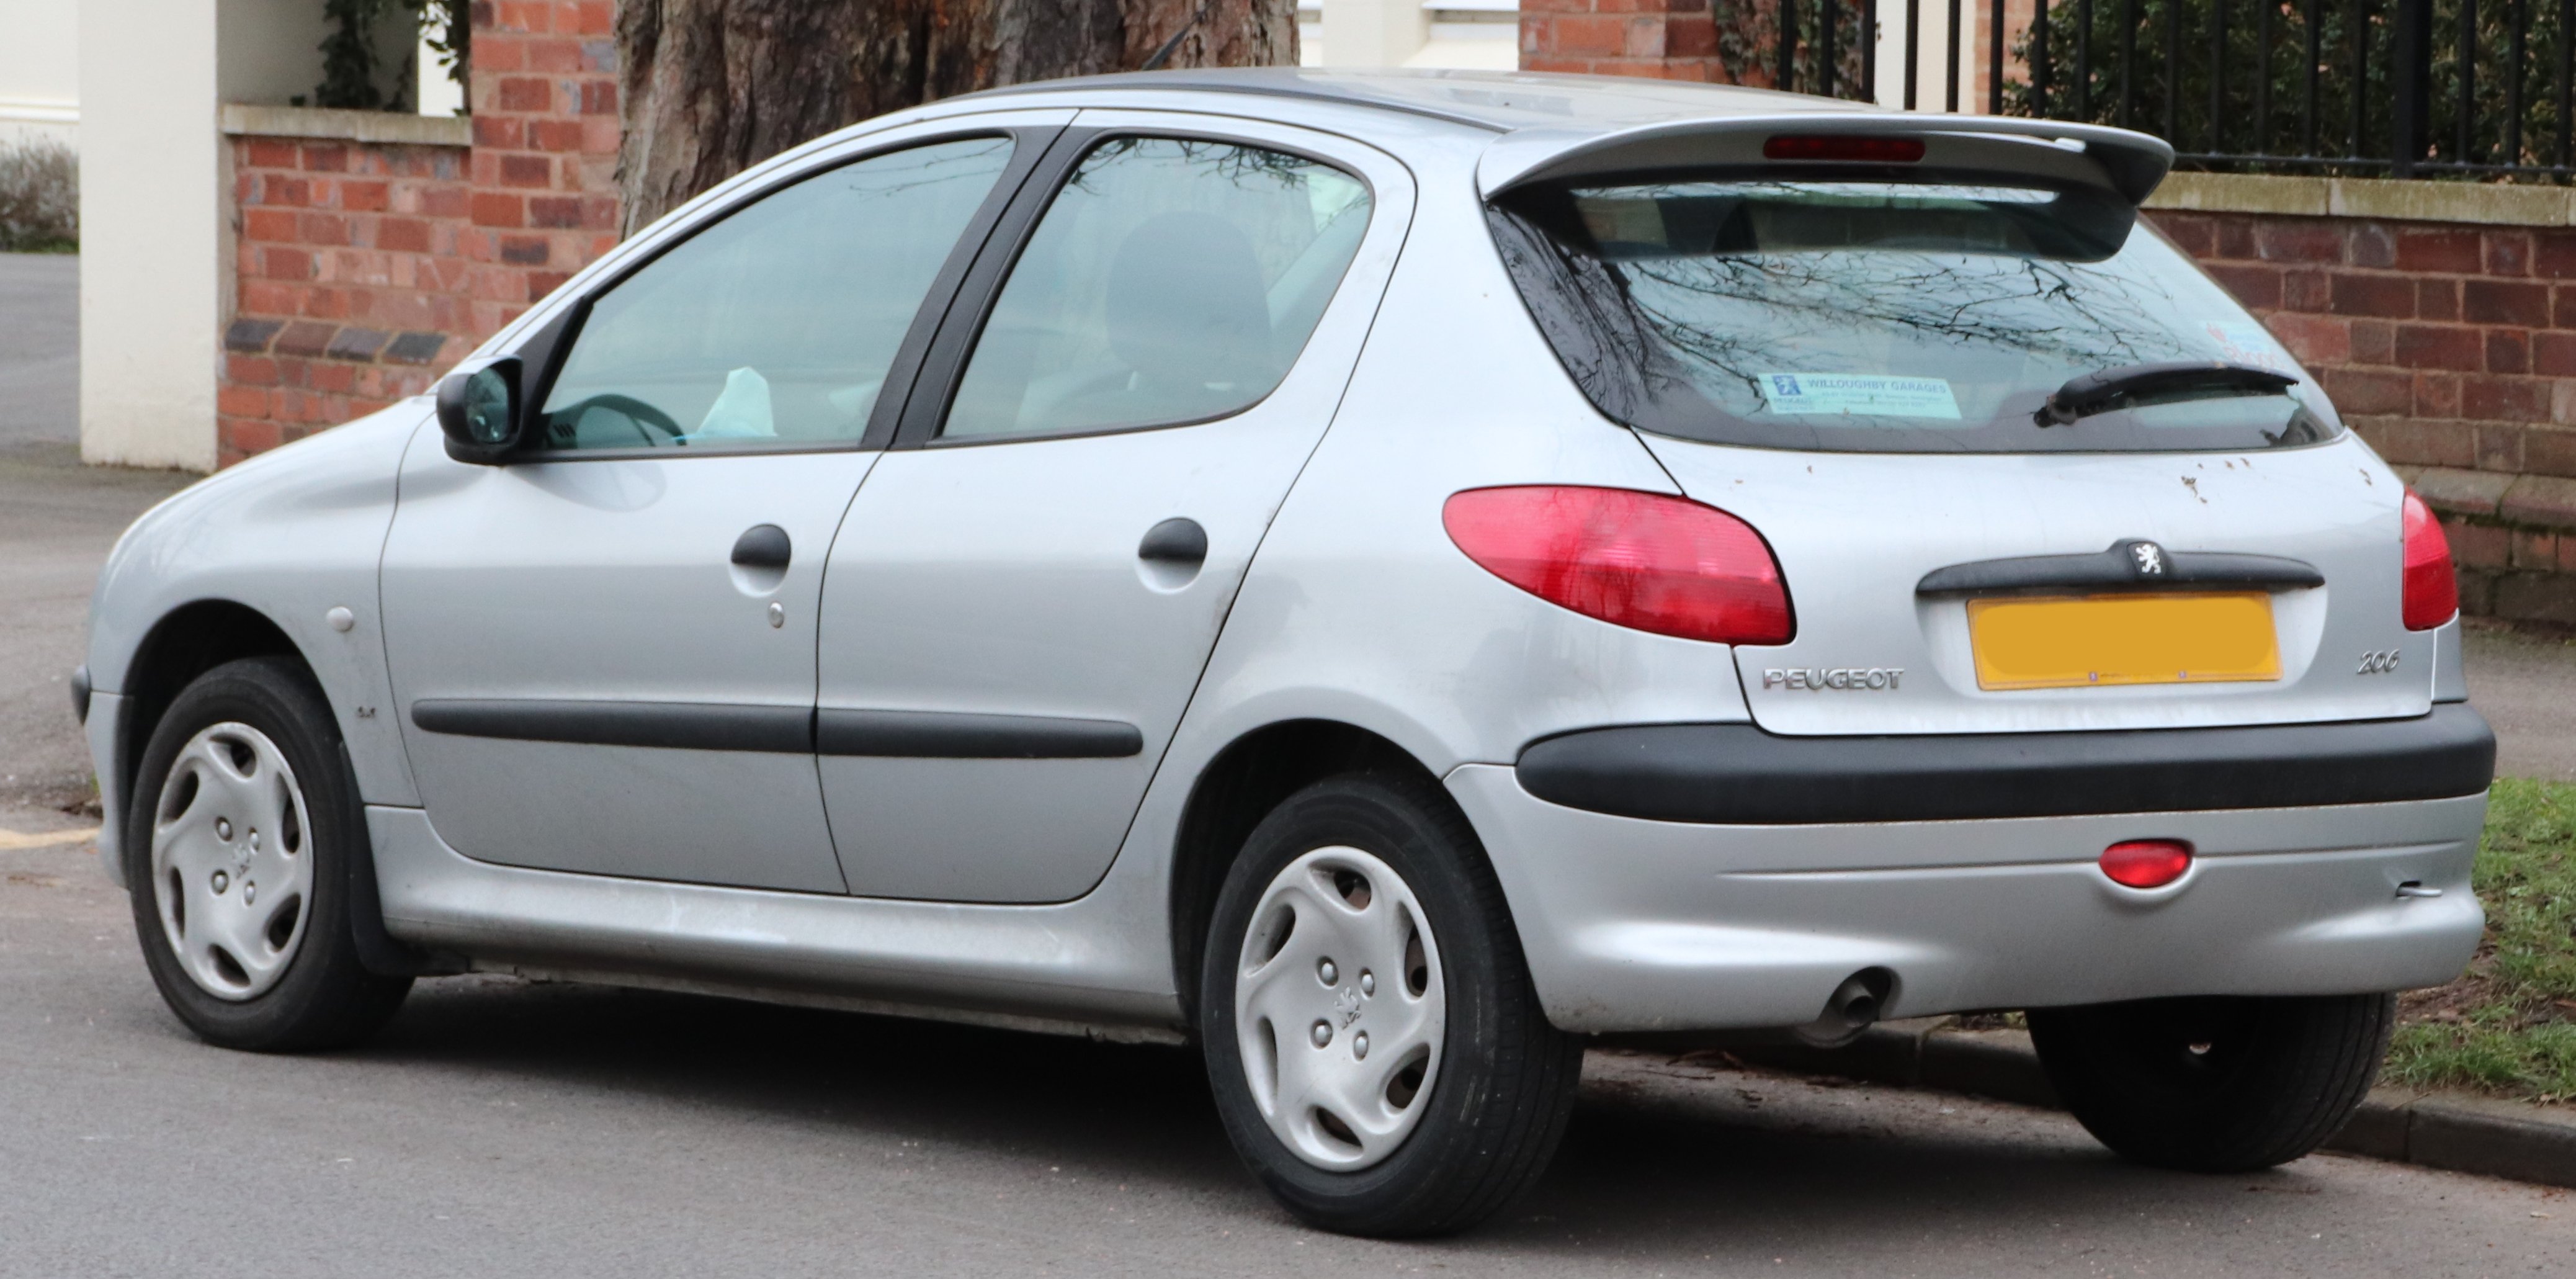 Peugeot 206 exterior - Rear Right Angled